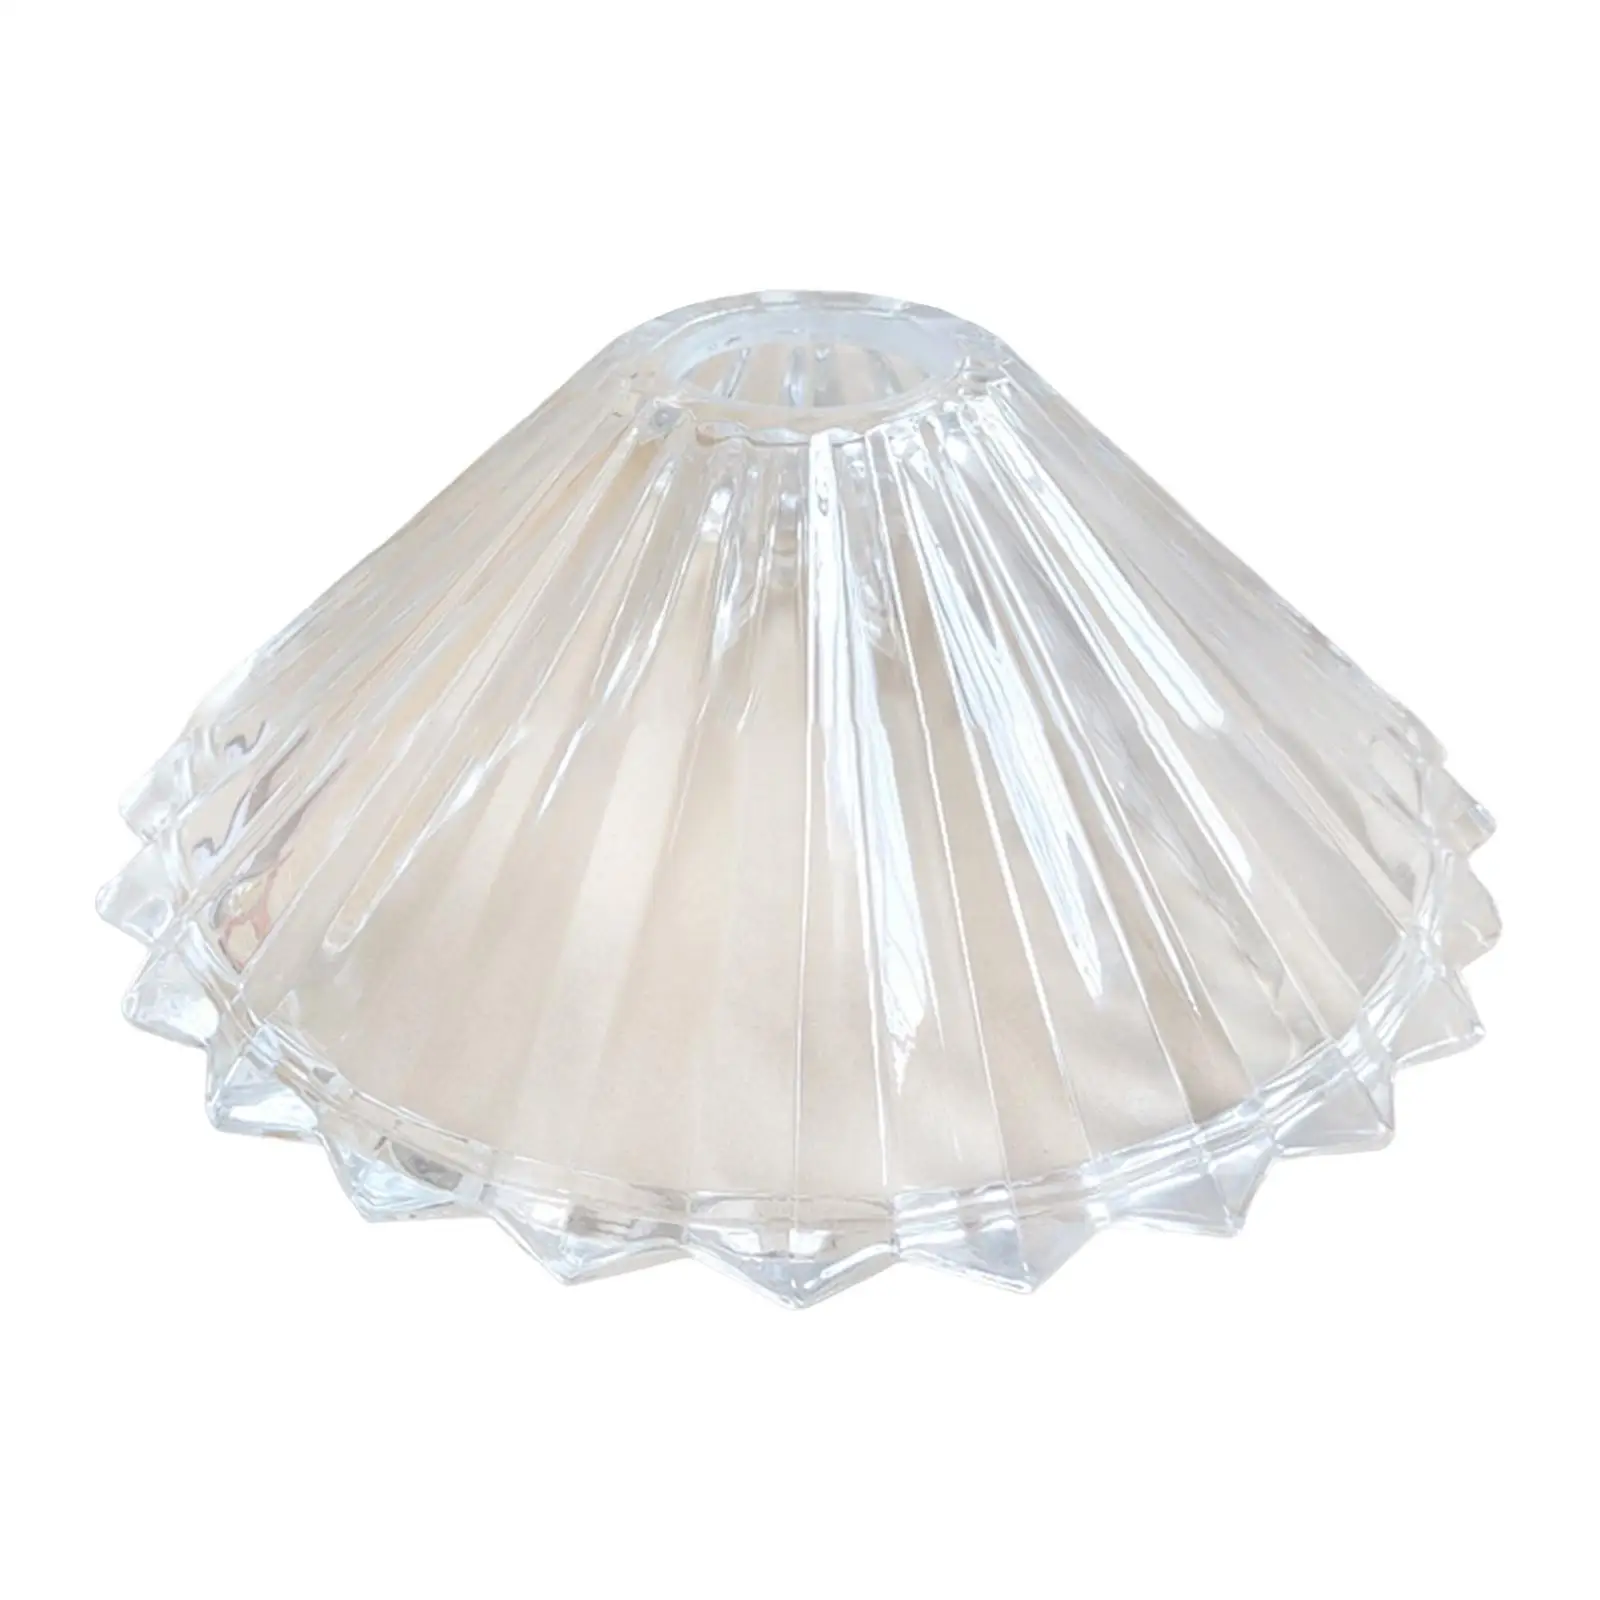 Minimalist Crystal Lamp Shade Cover Durable Transparent Glass Lights Covers for Living Room